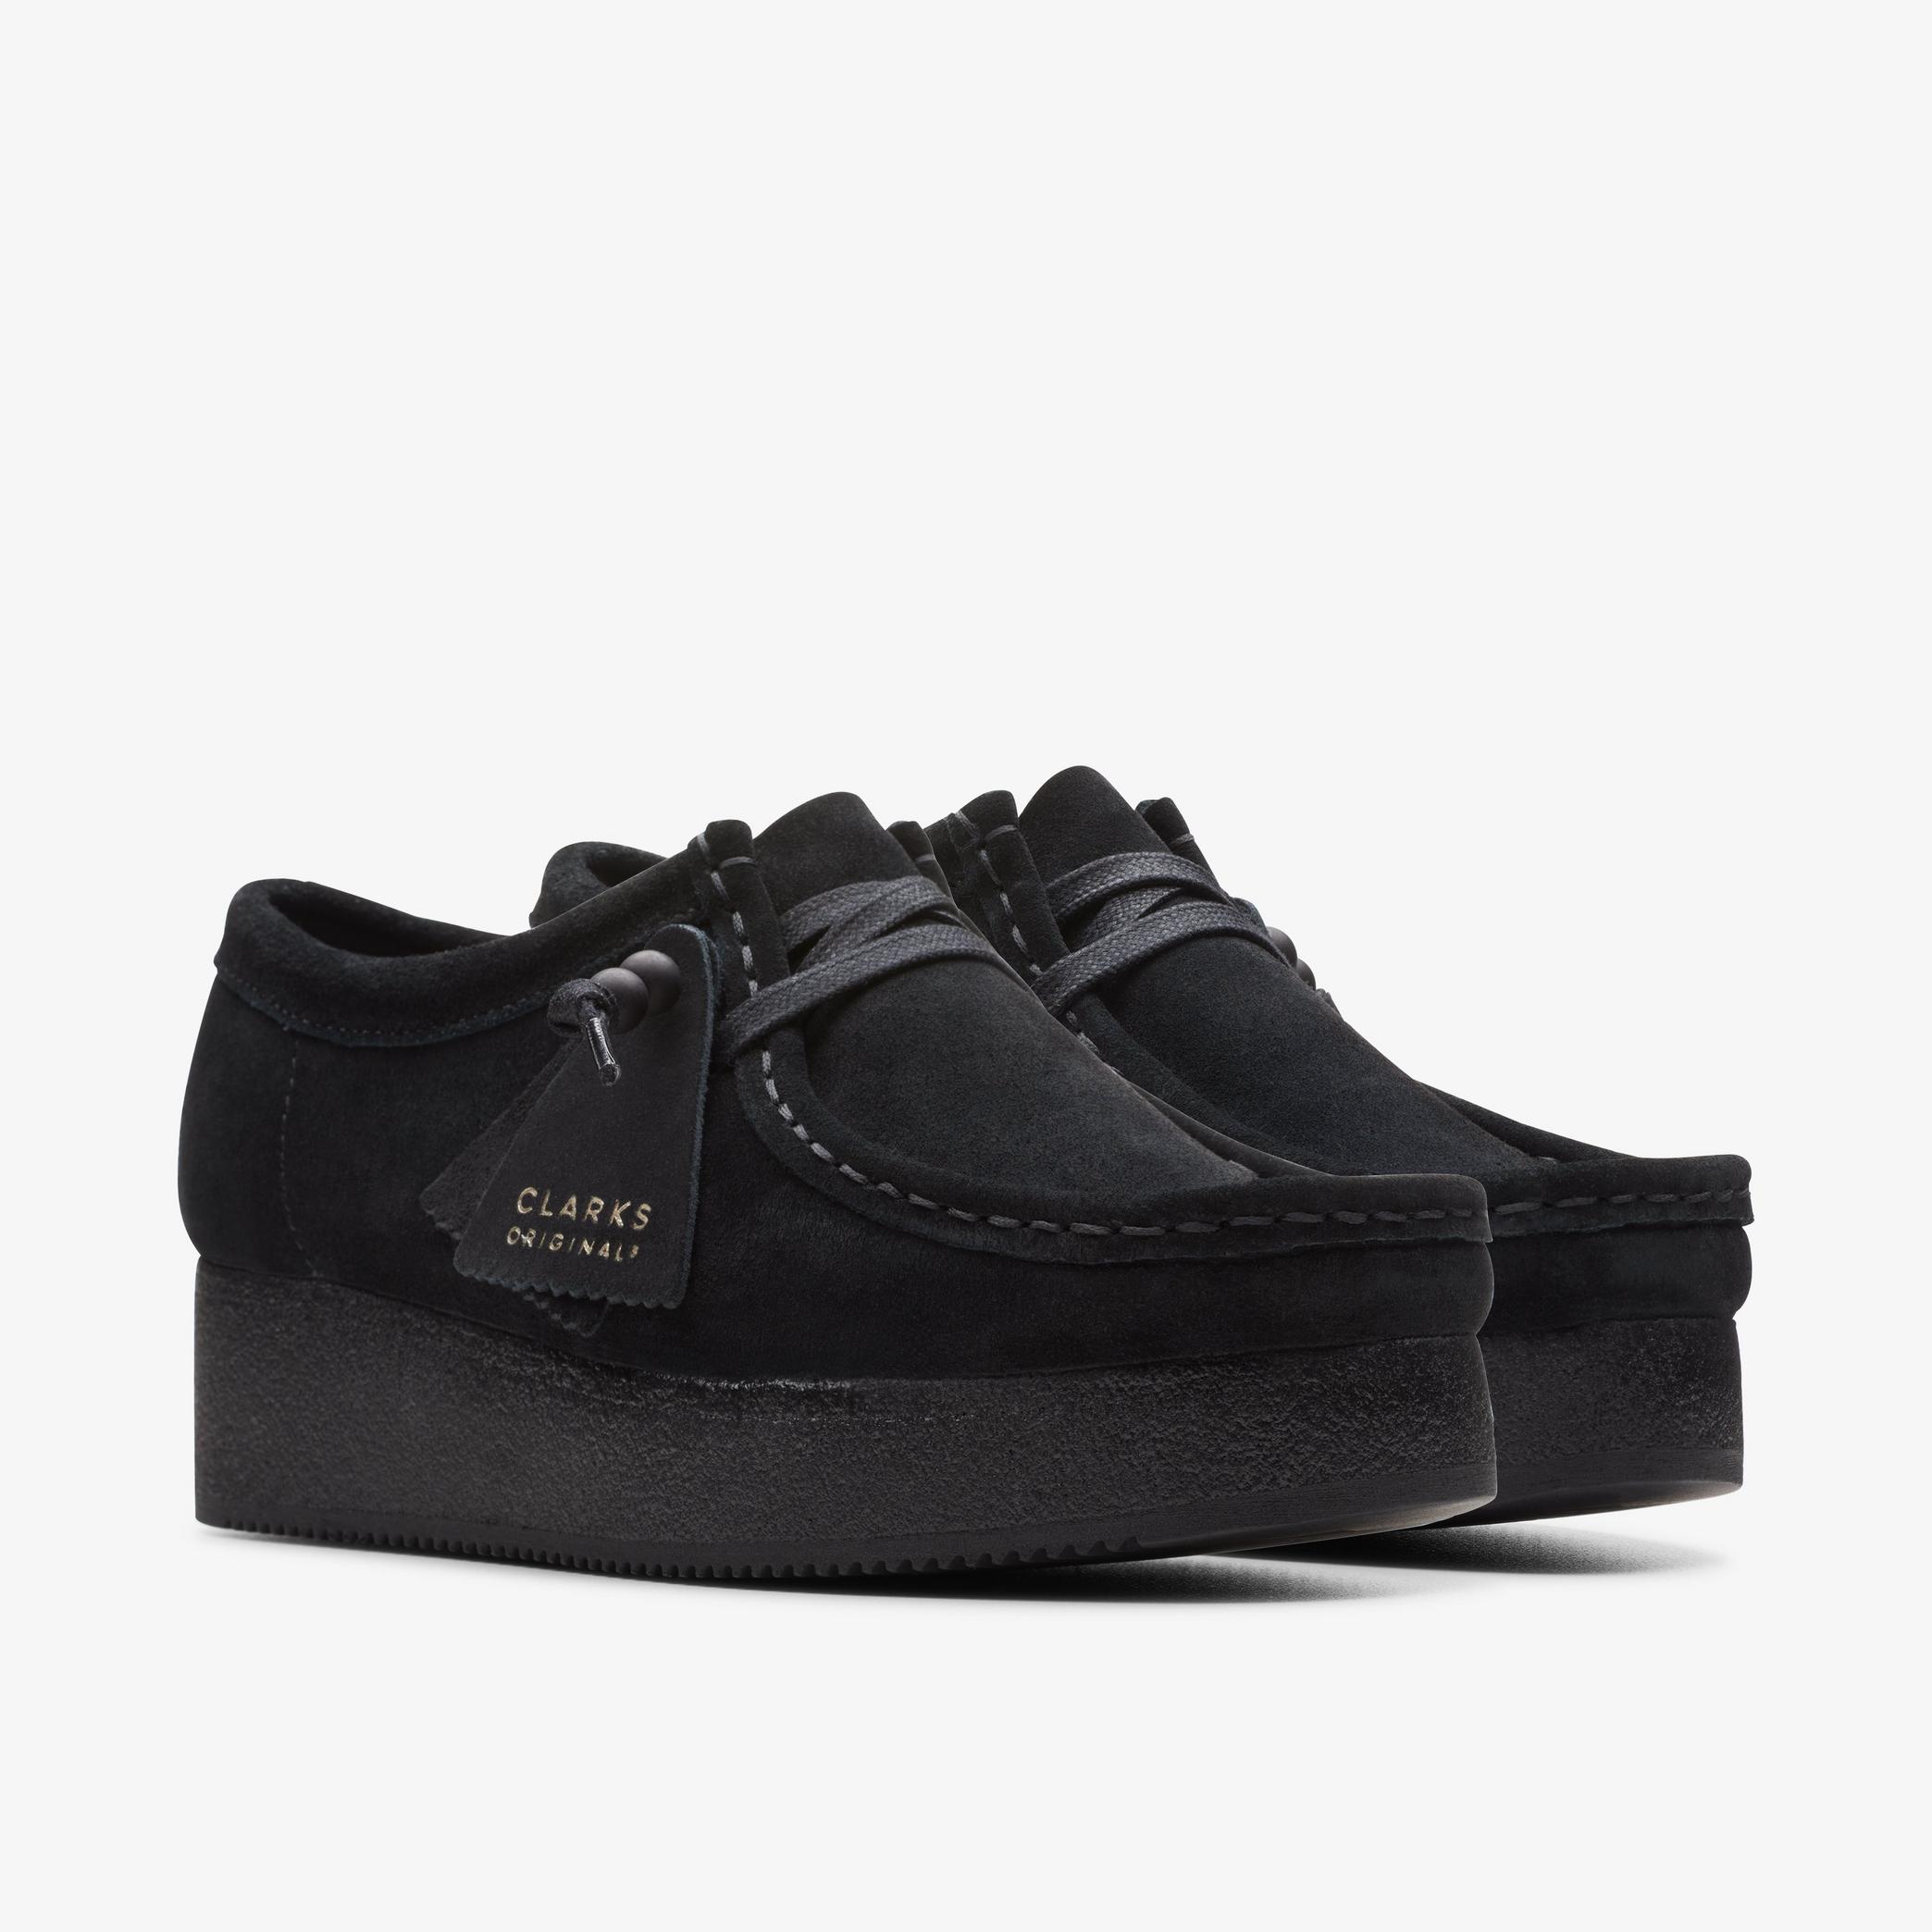 WOMENS Wallacraft Bee Black Suede Moccasins | Clarks US